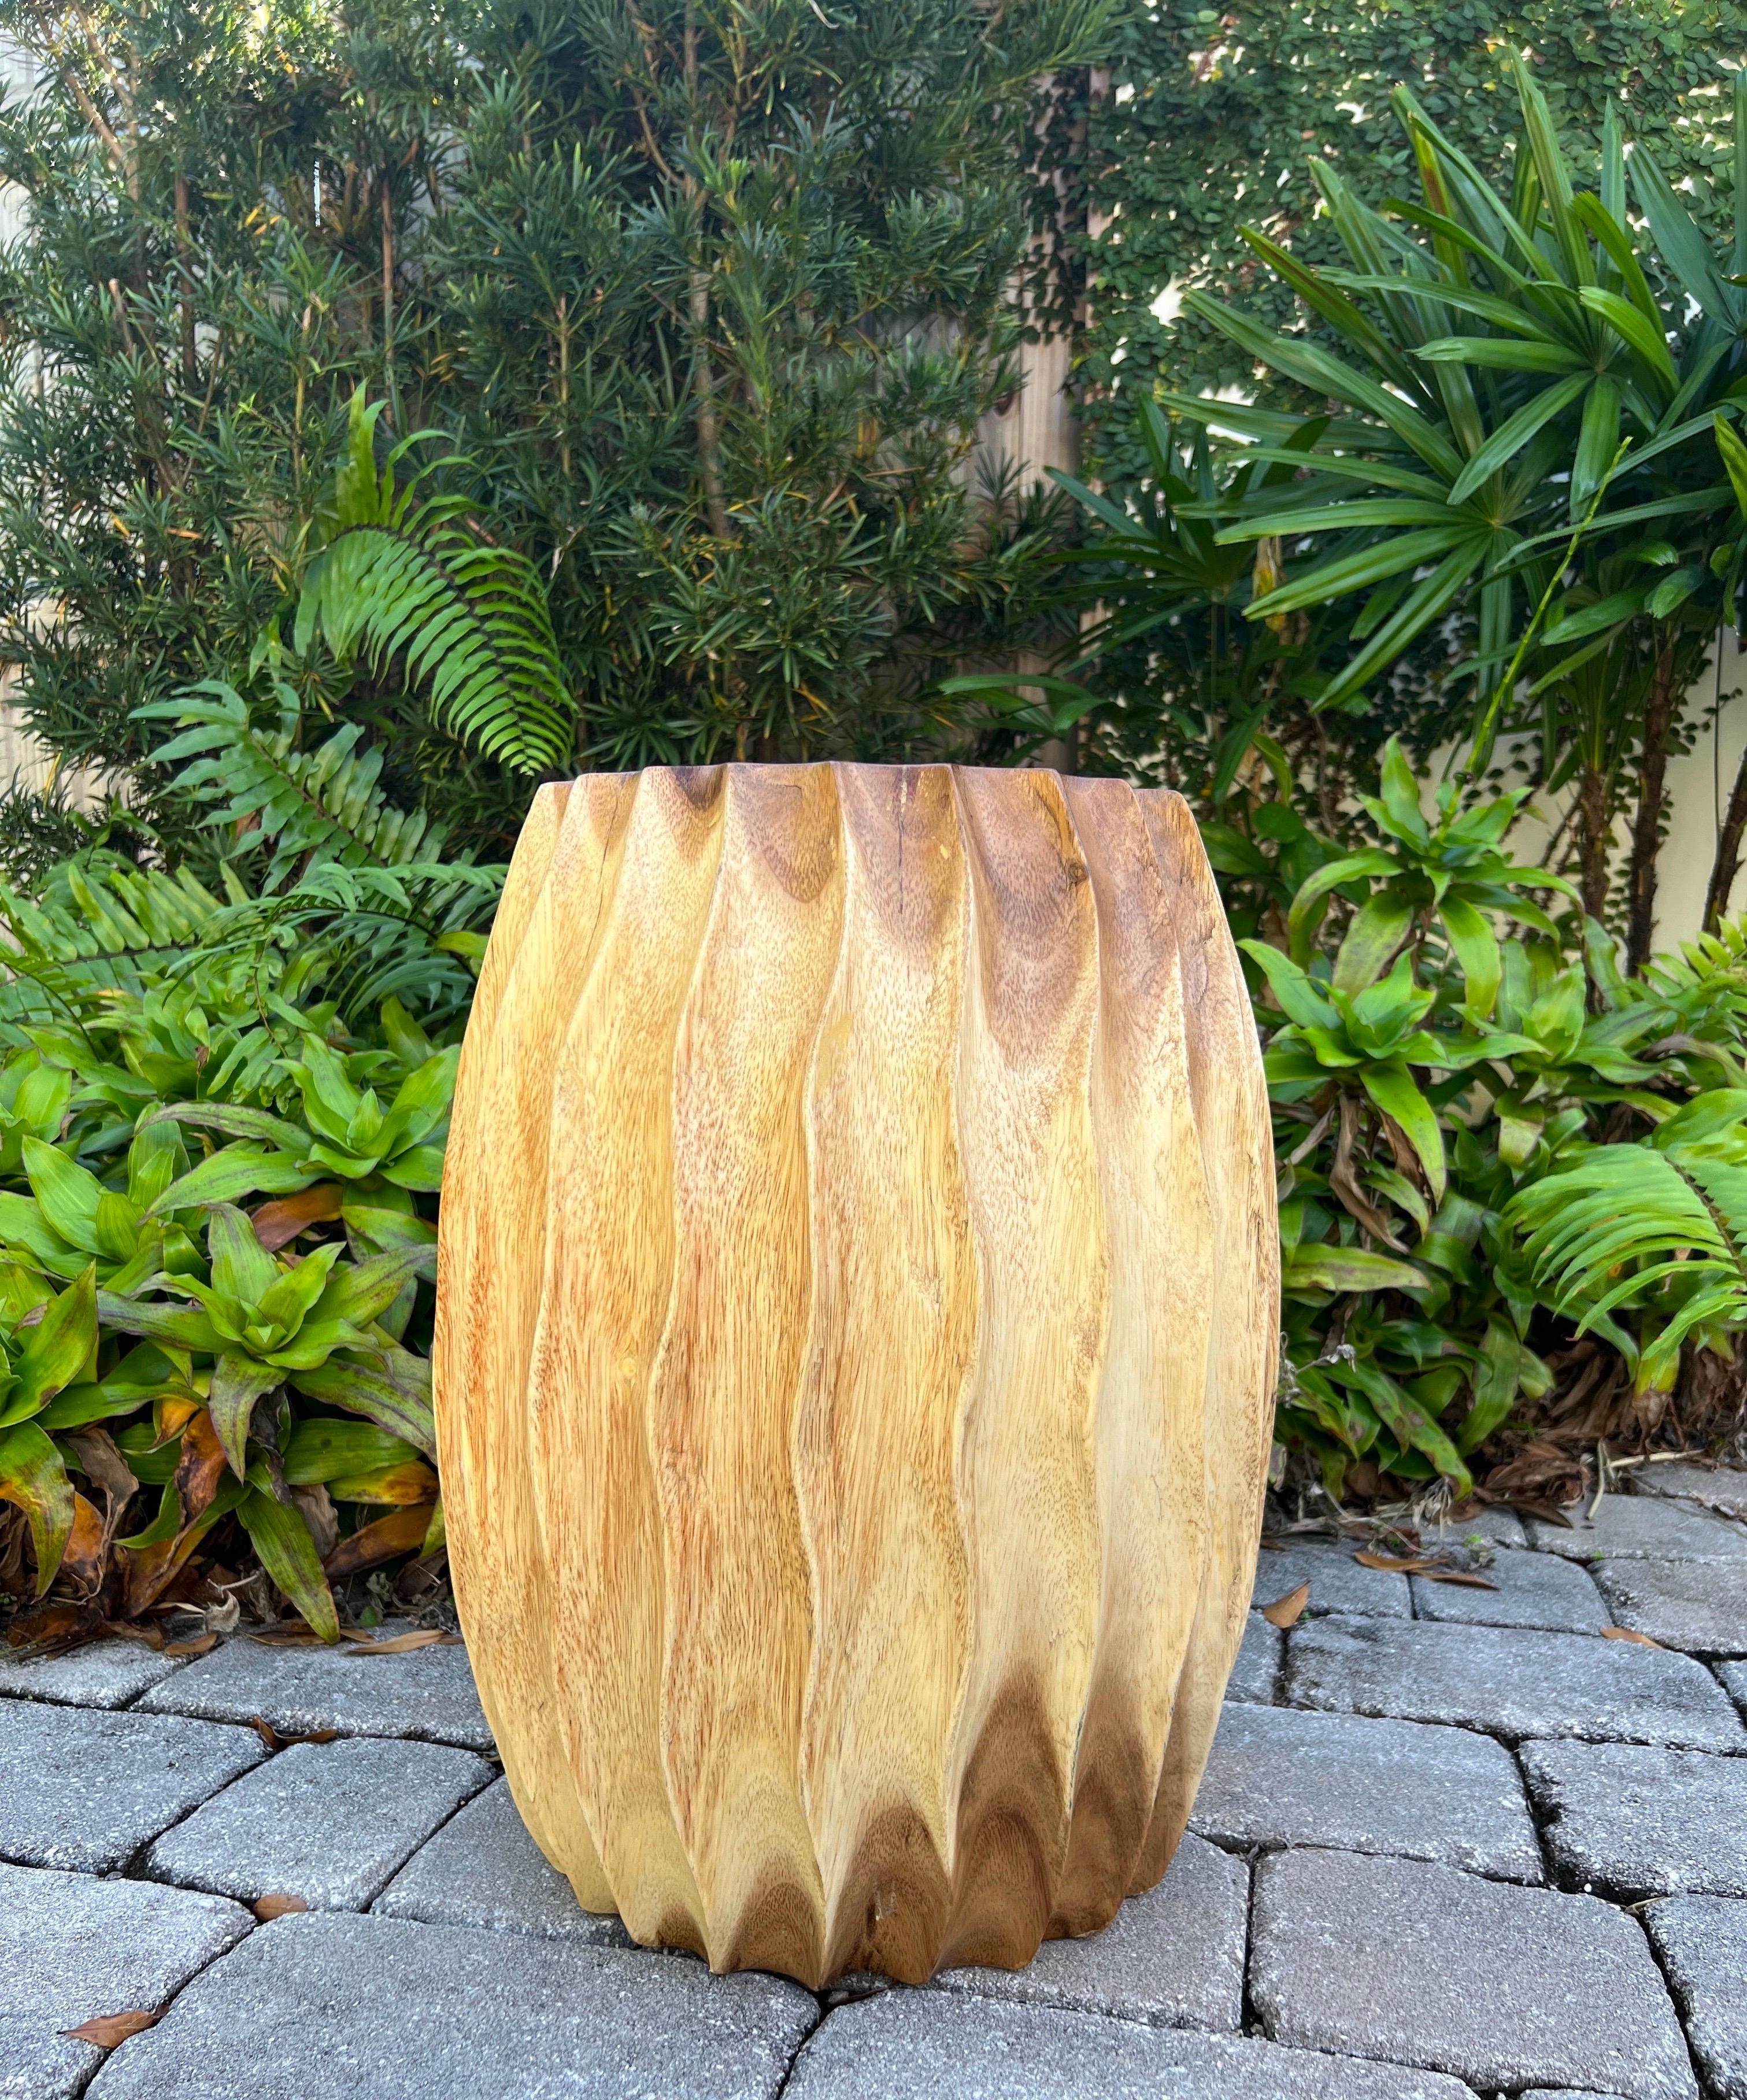 Organic modern sculptural side table with fluted design. This versatile piece can be used as a stool, a pedestal, or a drum table. Comprised of reclaimed suar wood, the drum table features hand carved fluted sides with wave formation. Each table is